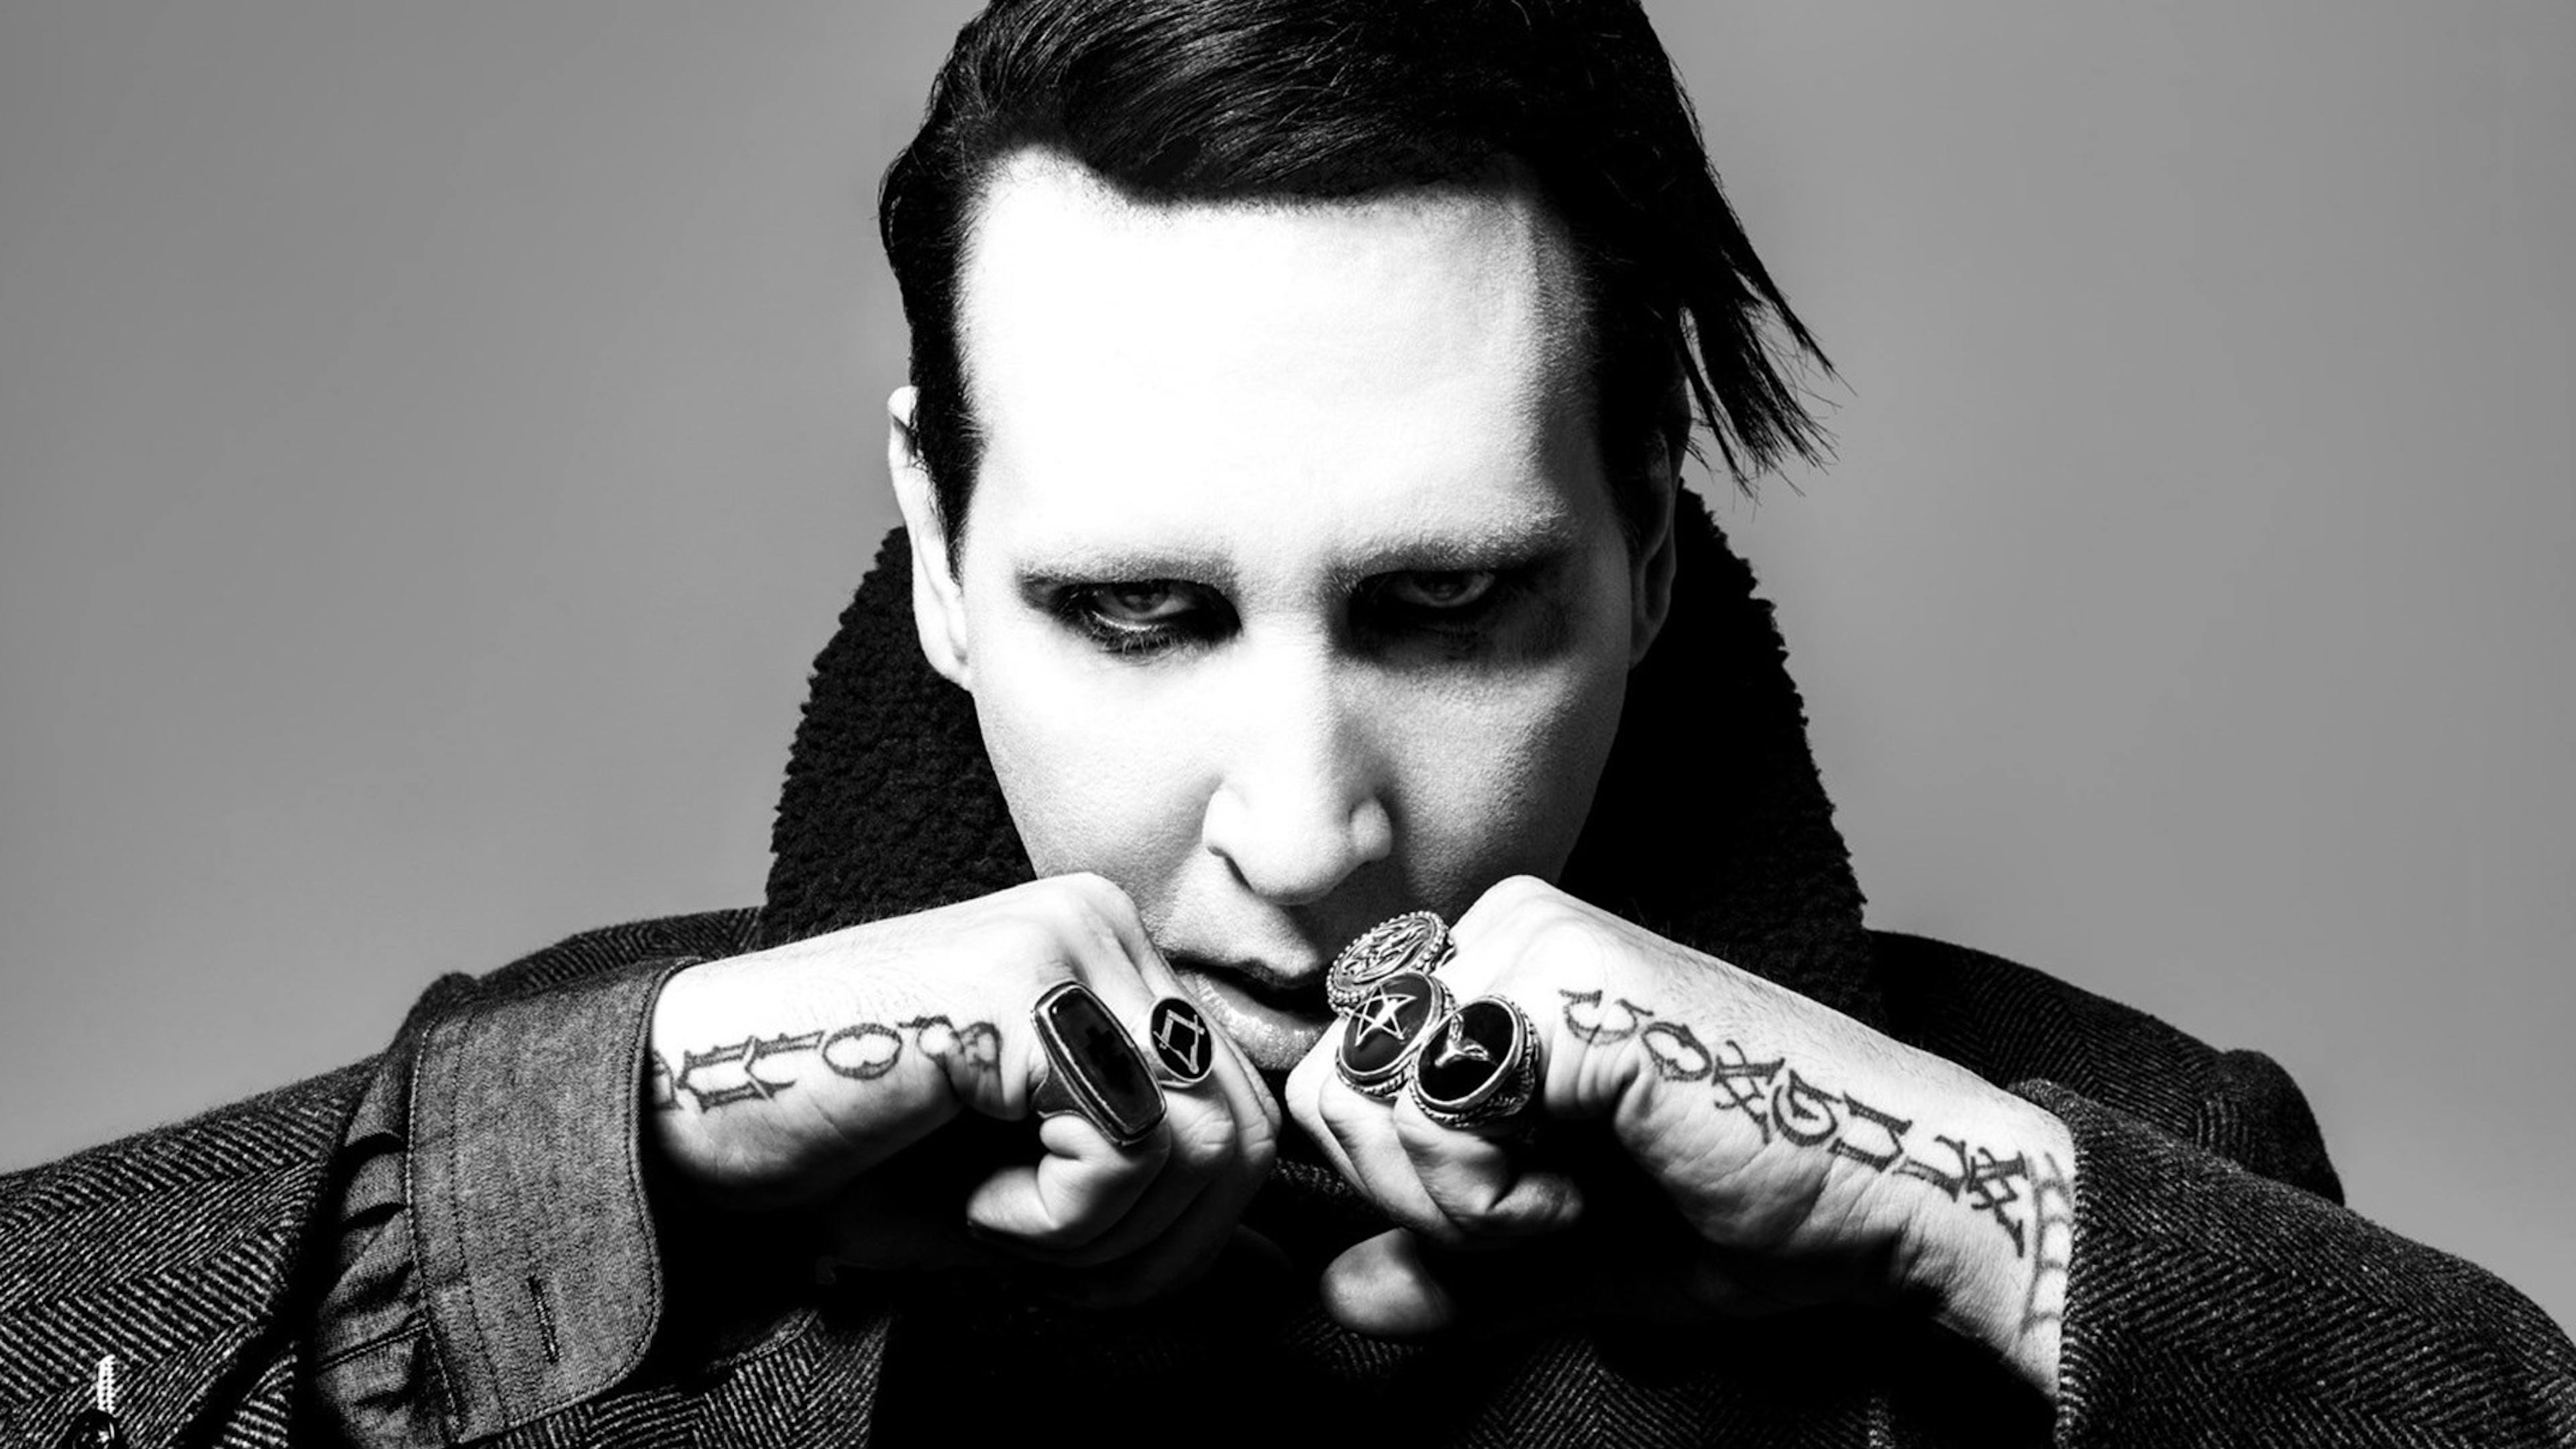 The New Marilyn Manson Album Is "Finished" And A "Masterpiece"